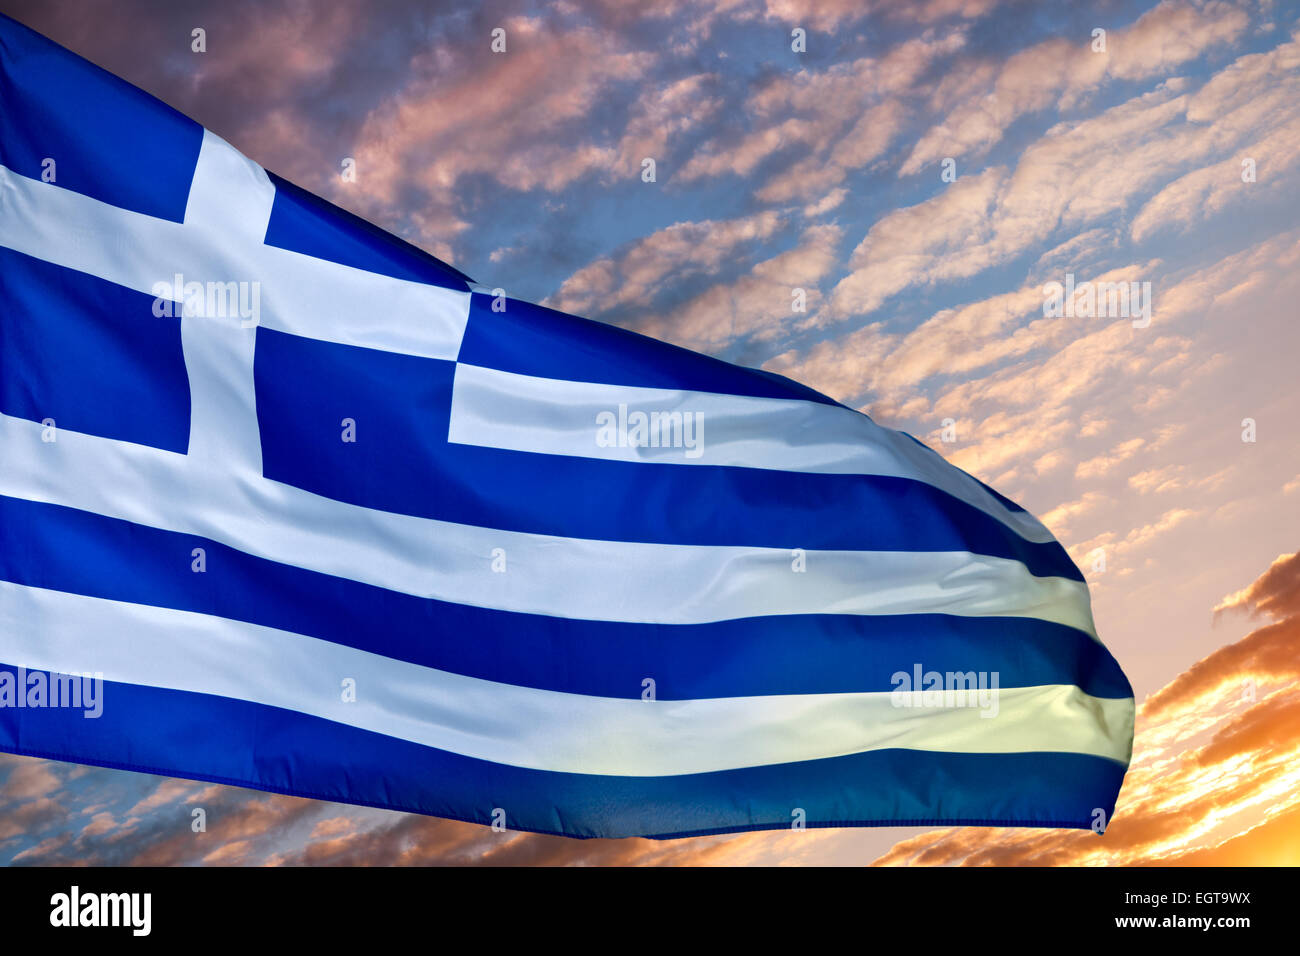 An image of the national flag of Greece against a new dawn sunrise. Stock Photo